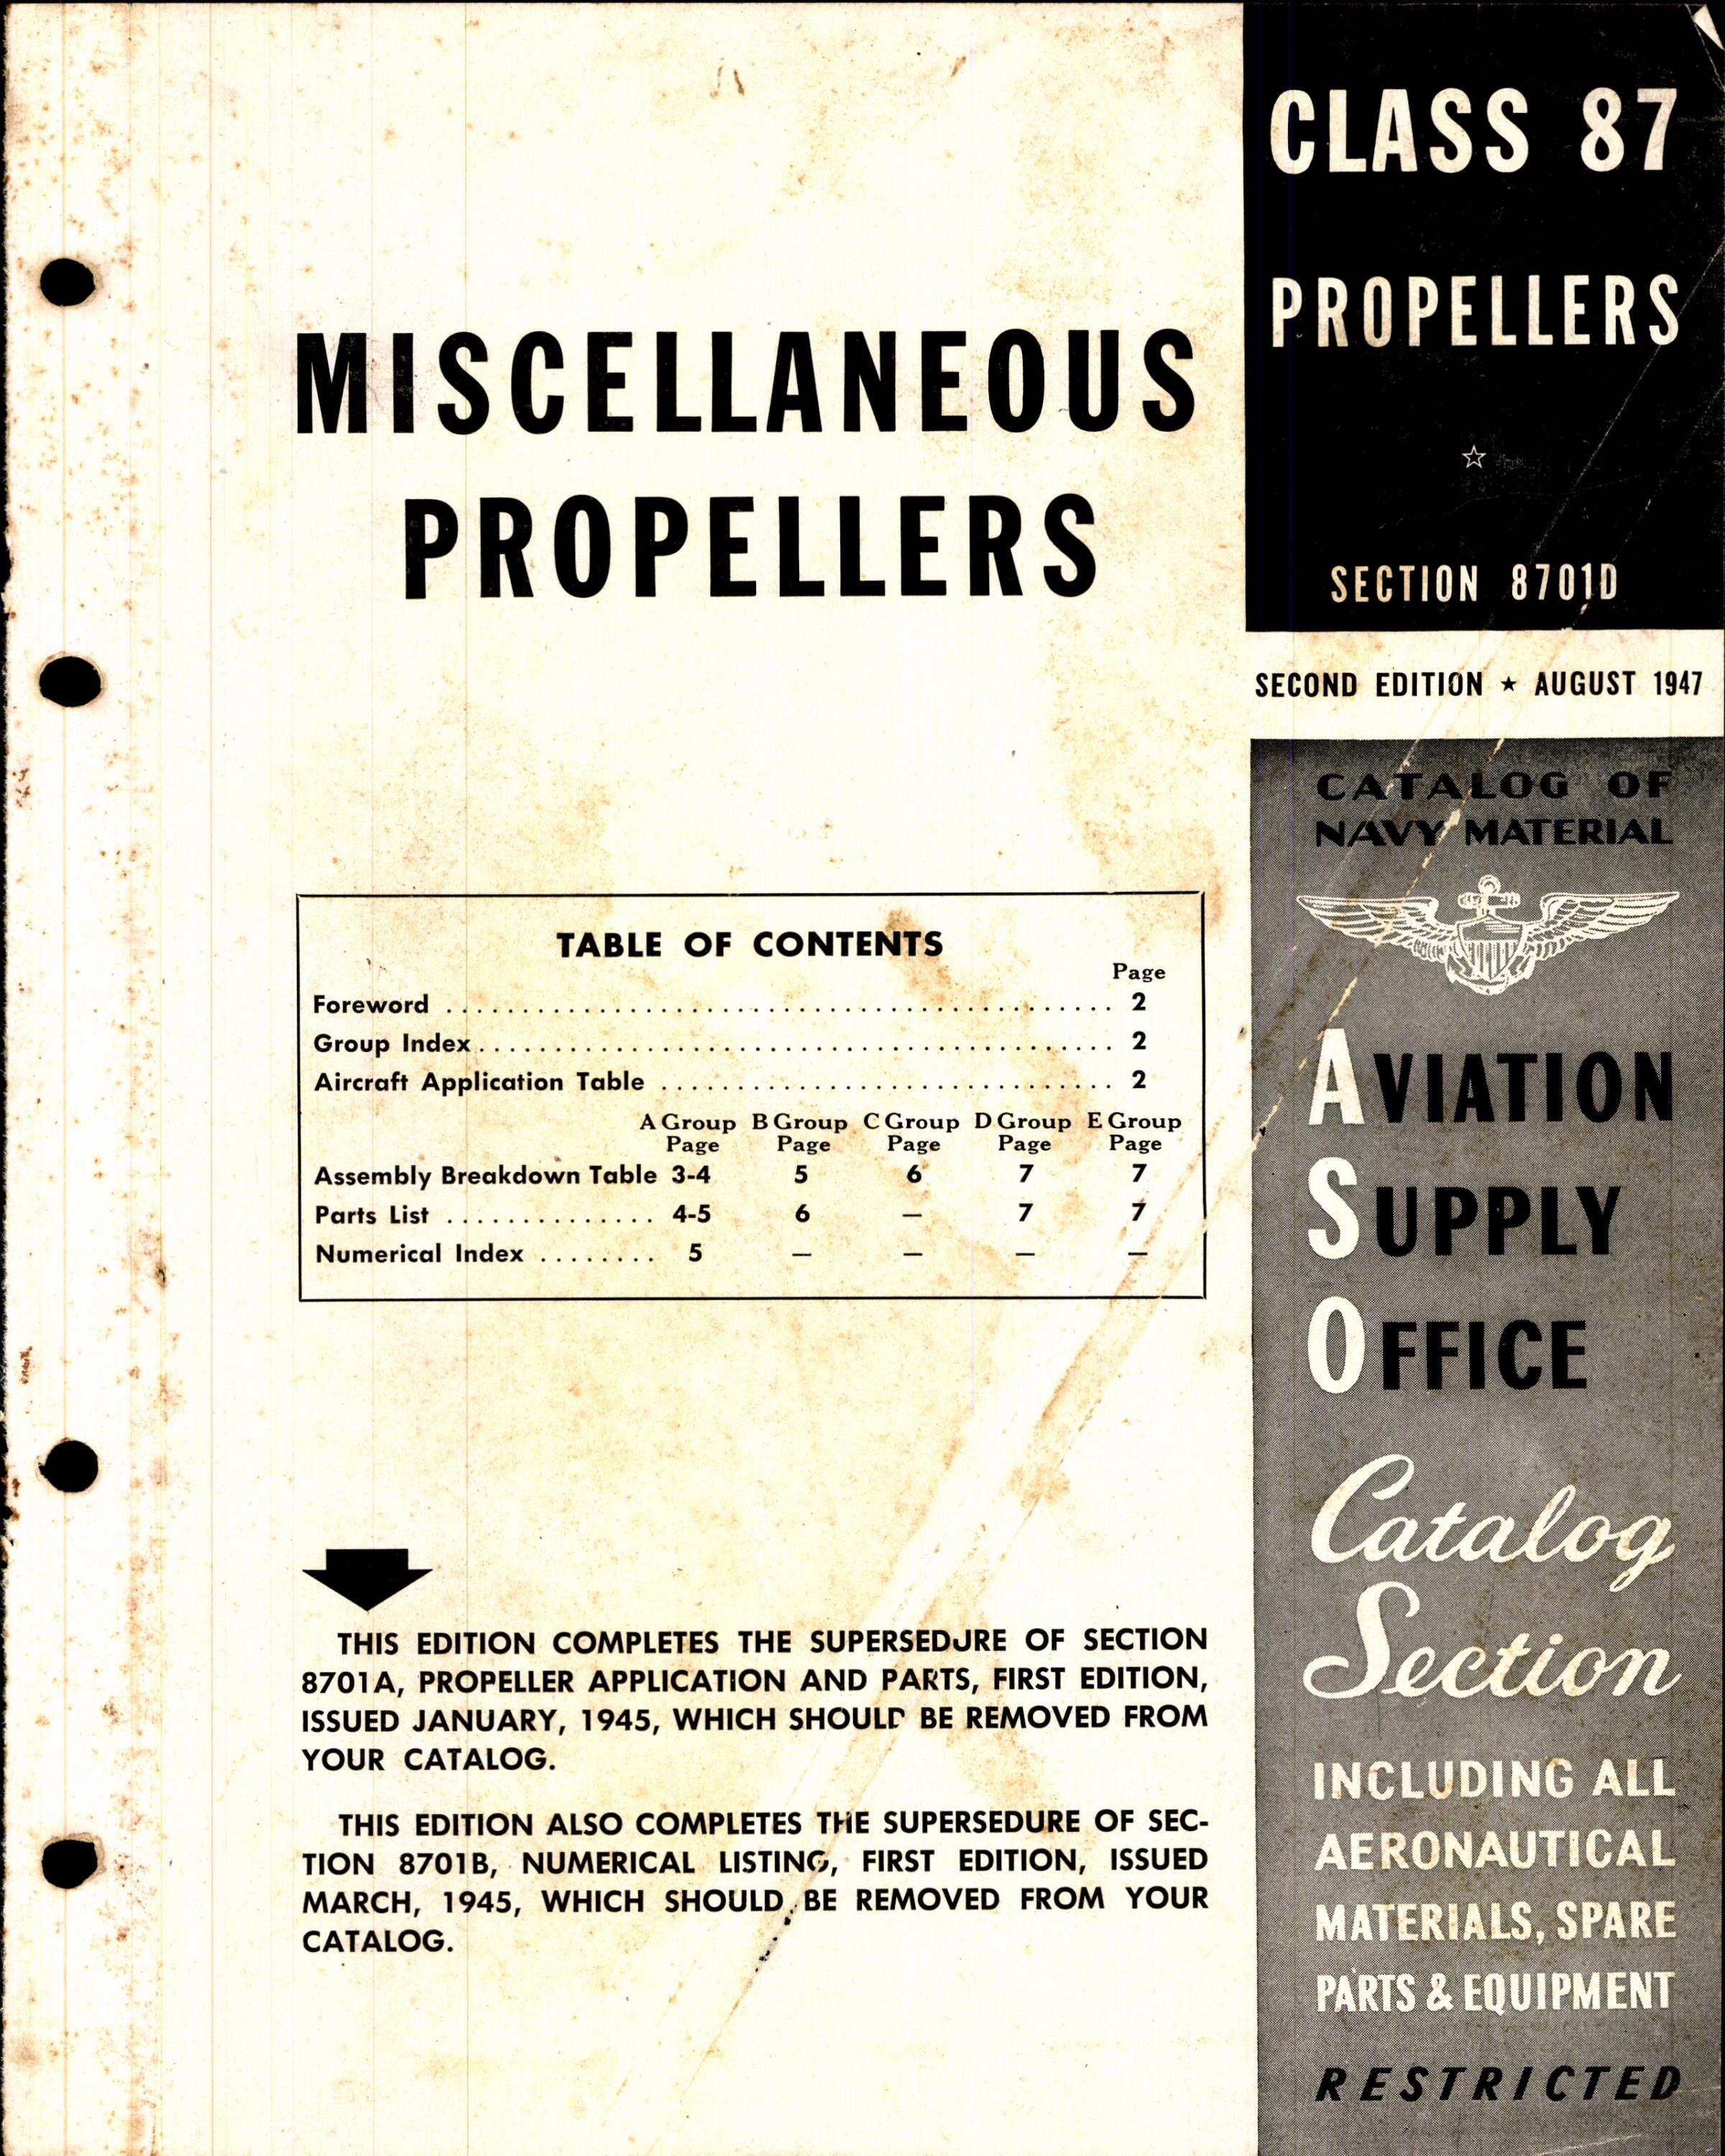 Sample page 1 from AirCorps Library document: Miscellaneous Propellers